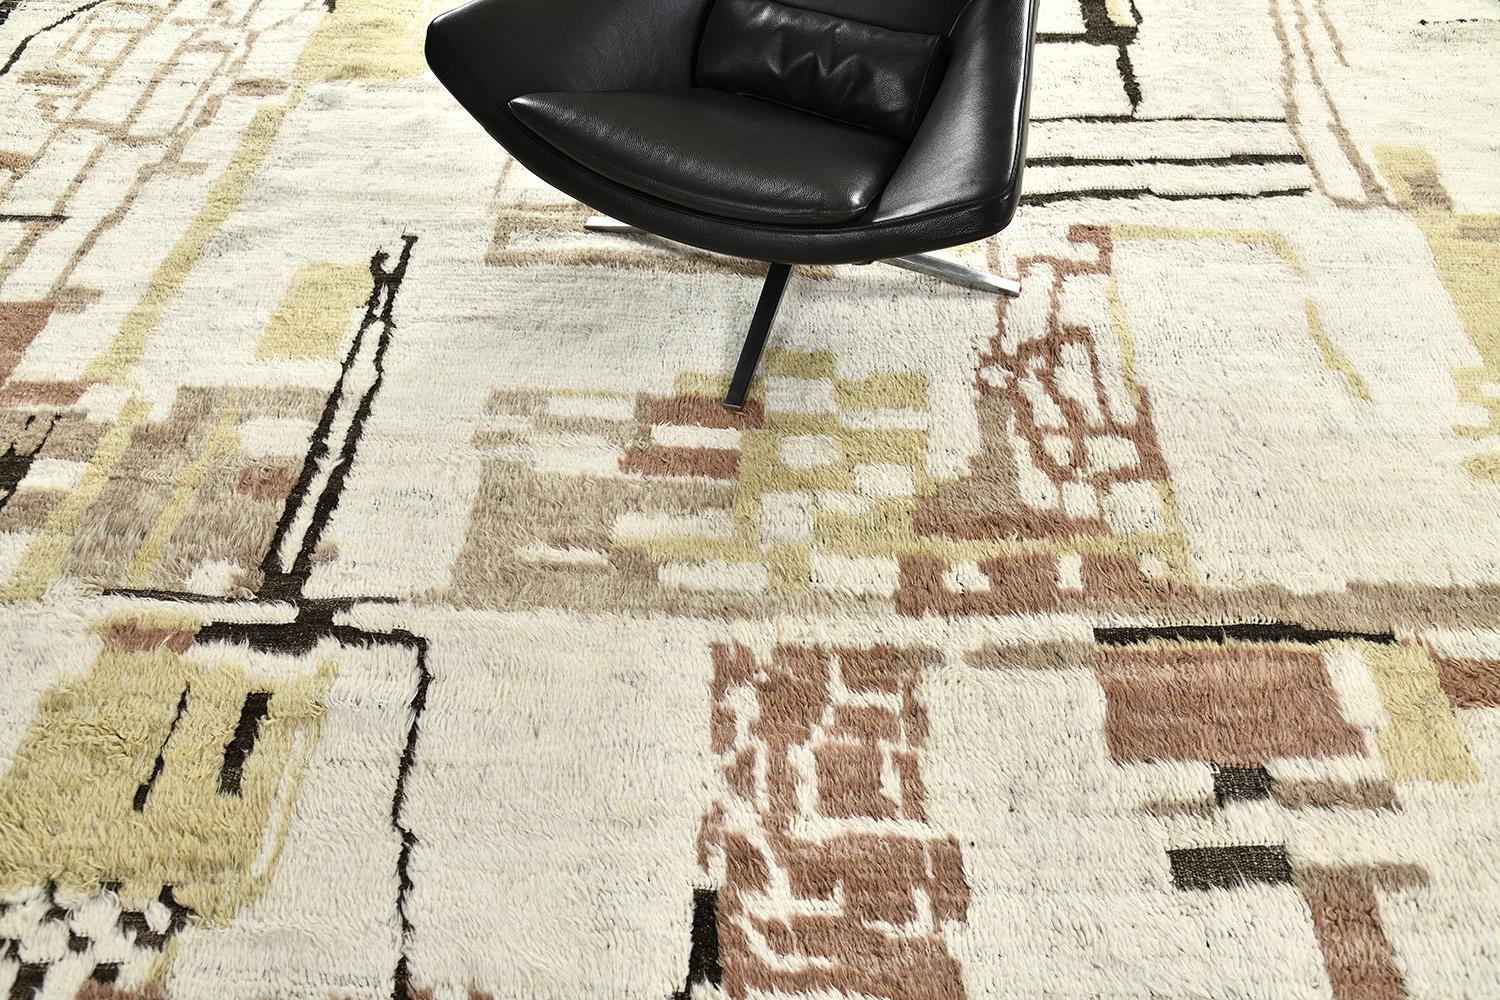 'Meliska' is an exquisitely textured rug with irregular motifs inspired from the Atlas Mountains of Morocco. Earthy tones of ivory, cedar and umber brown surrounded by umber brown shag work cohesively to make for a great contemporary interpretation